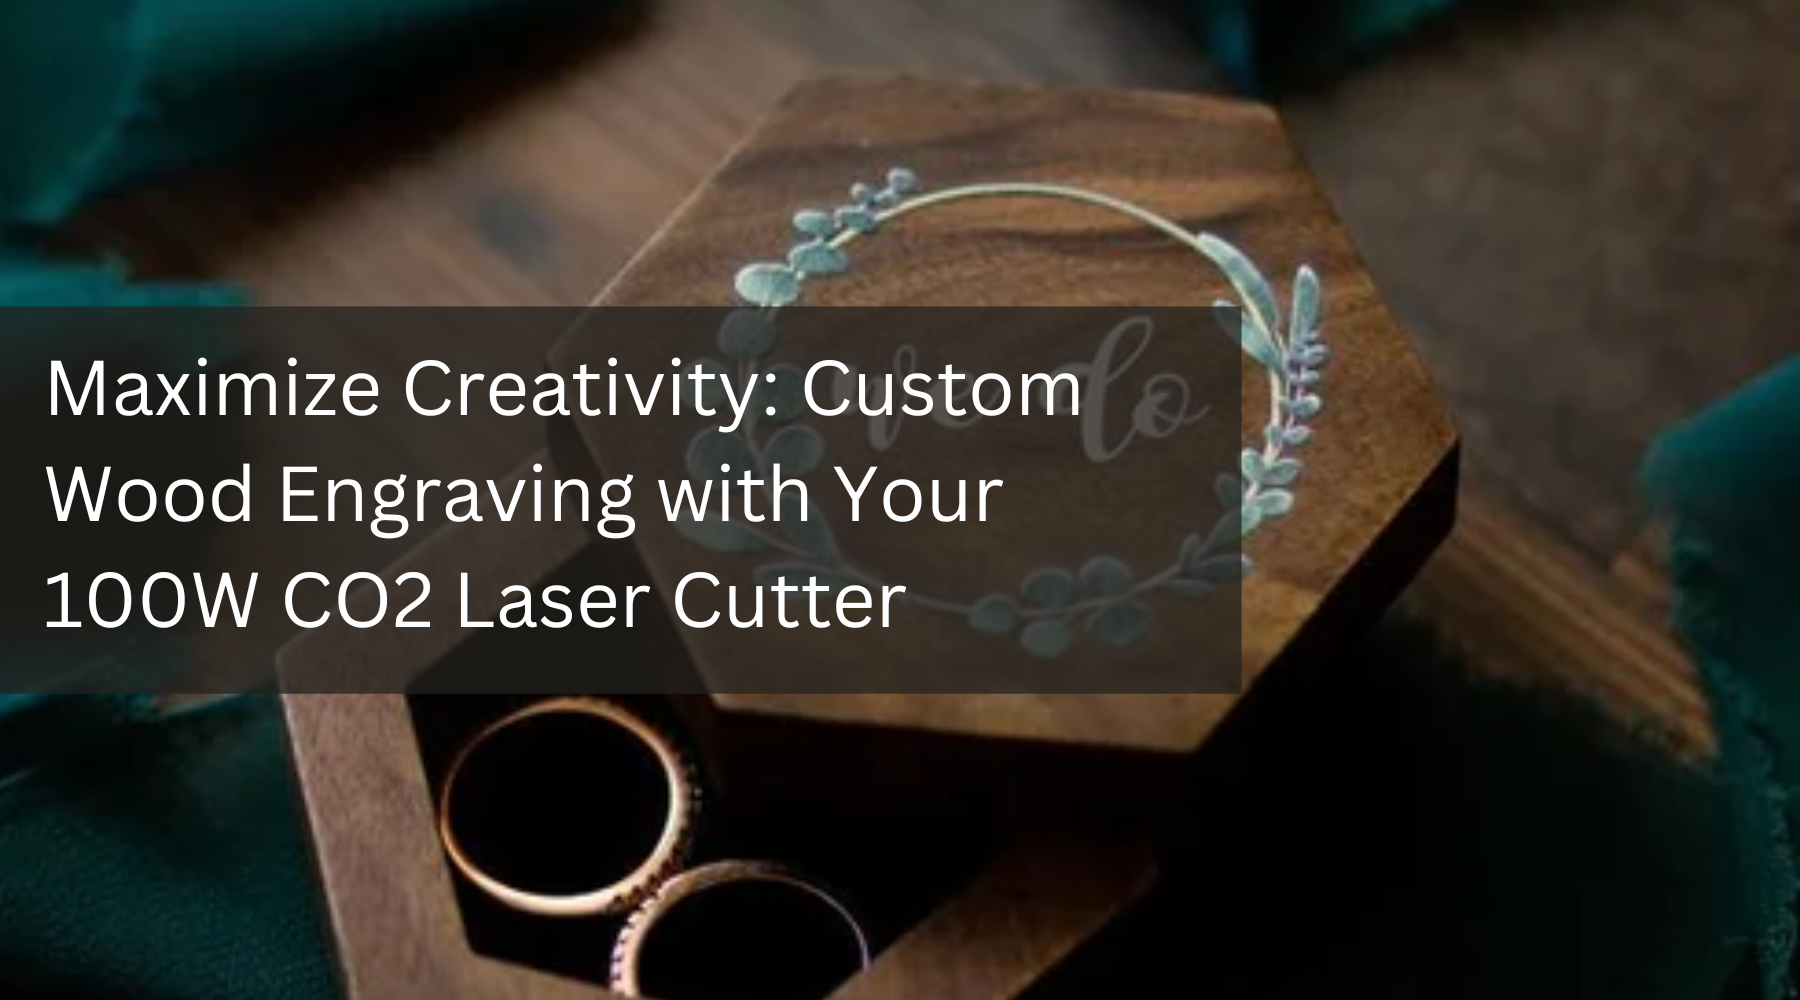 Maximize Creativity: Custom Wood Engraving with Your 100W CO2 Laser Cutter